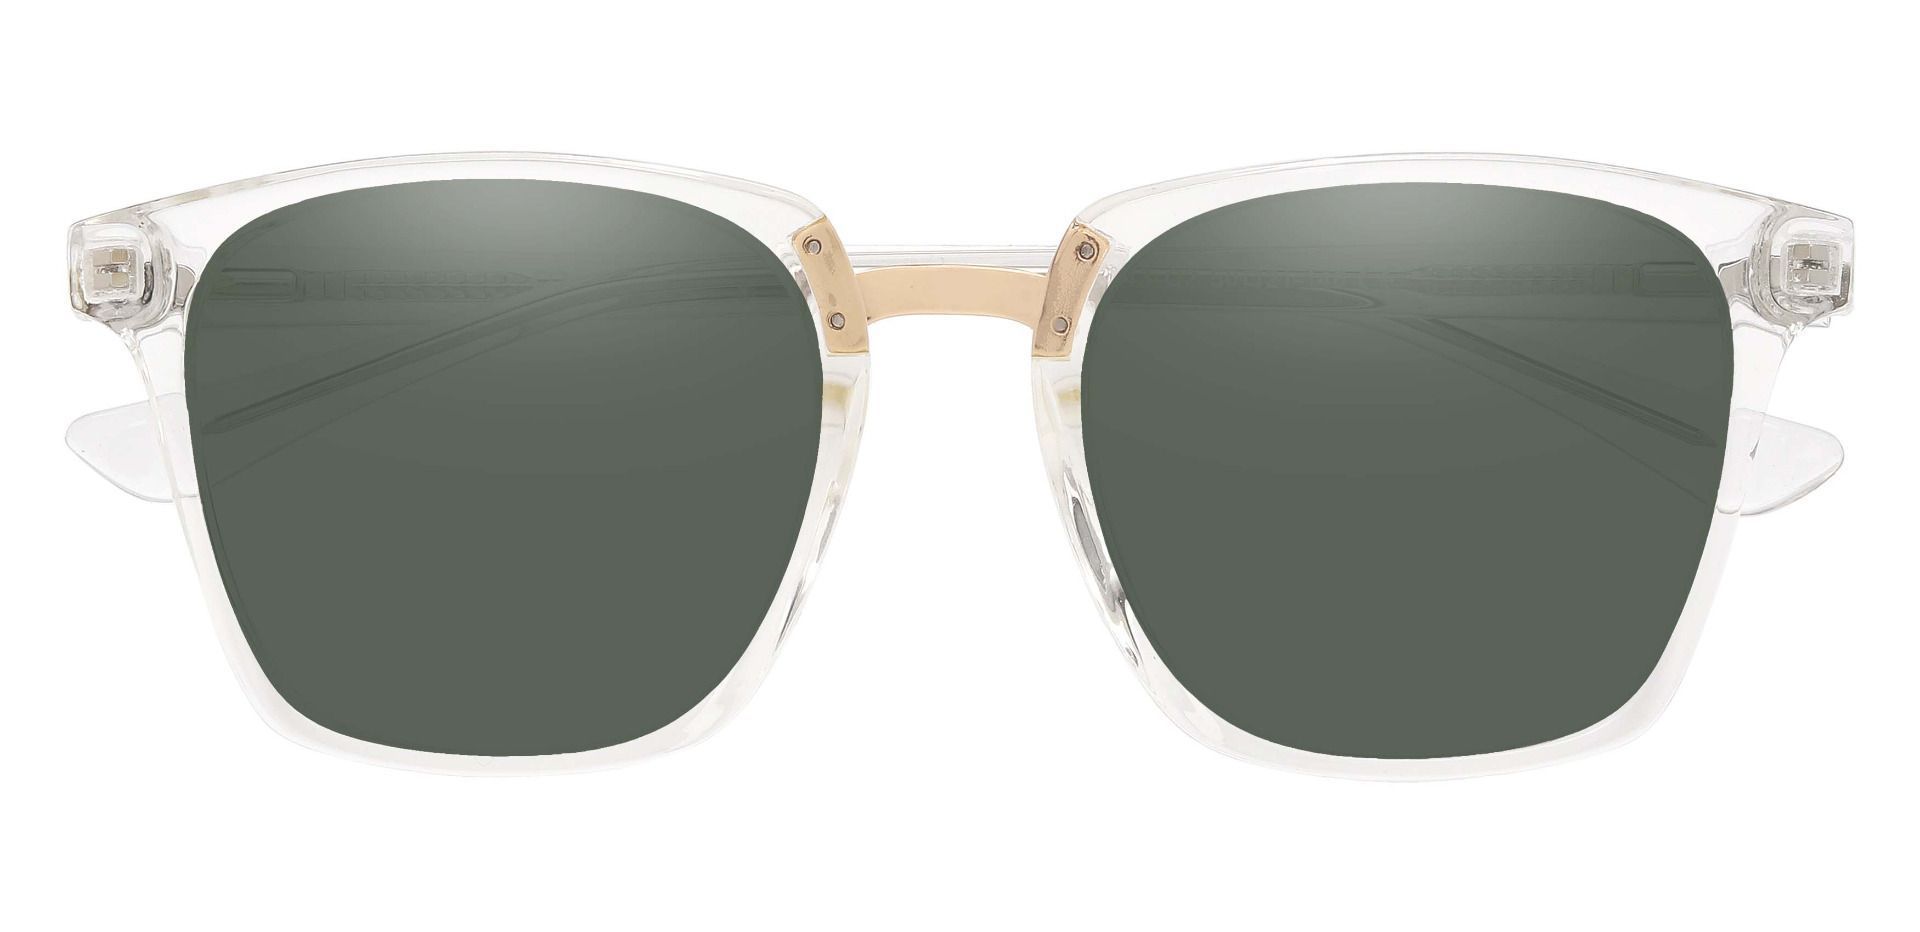 Delta Square Non-Rx Sunglasses - Clear Frame With Green Lenses